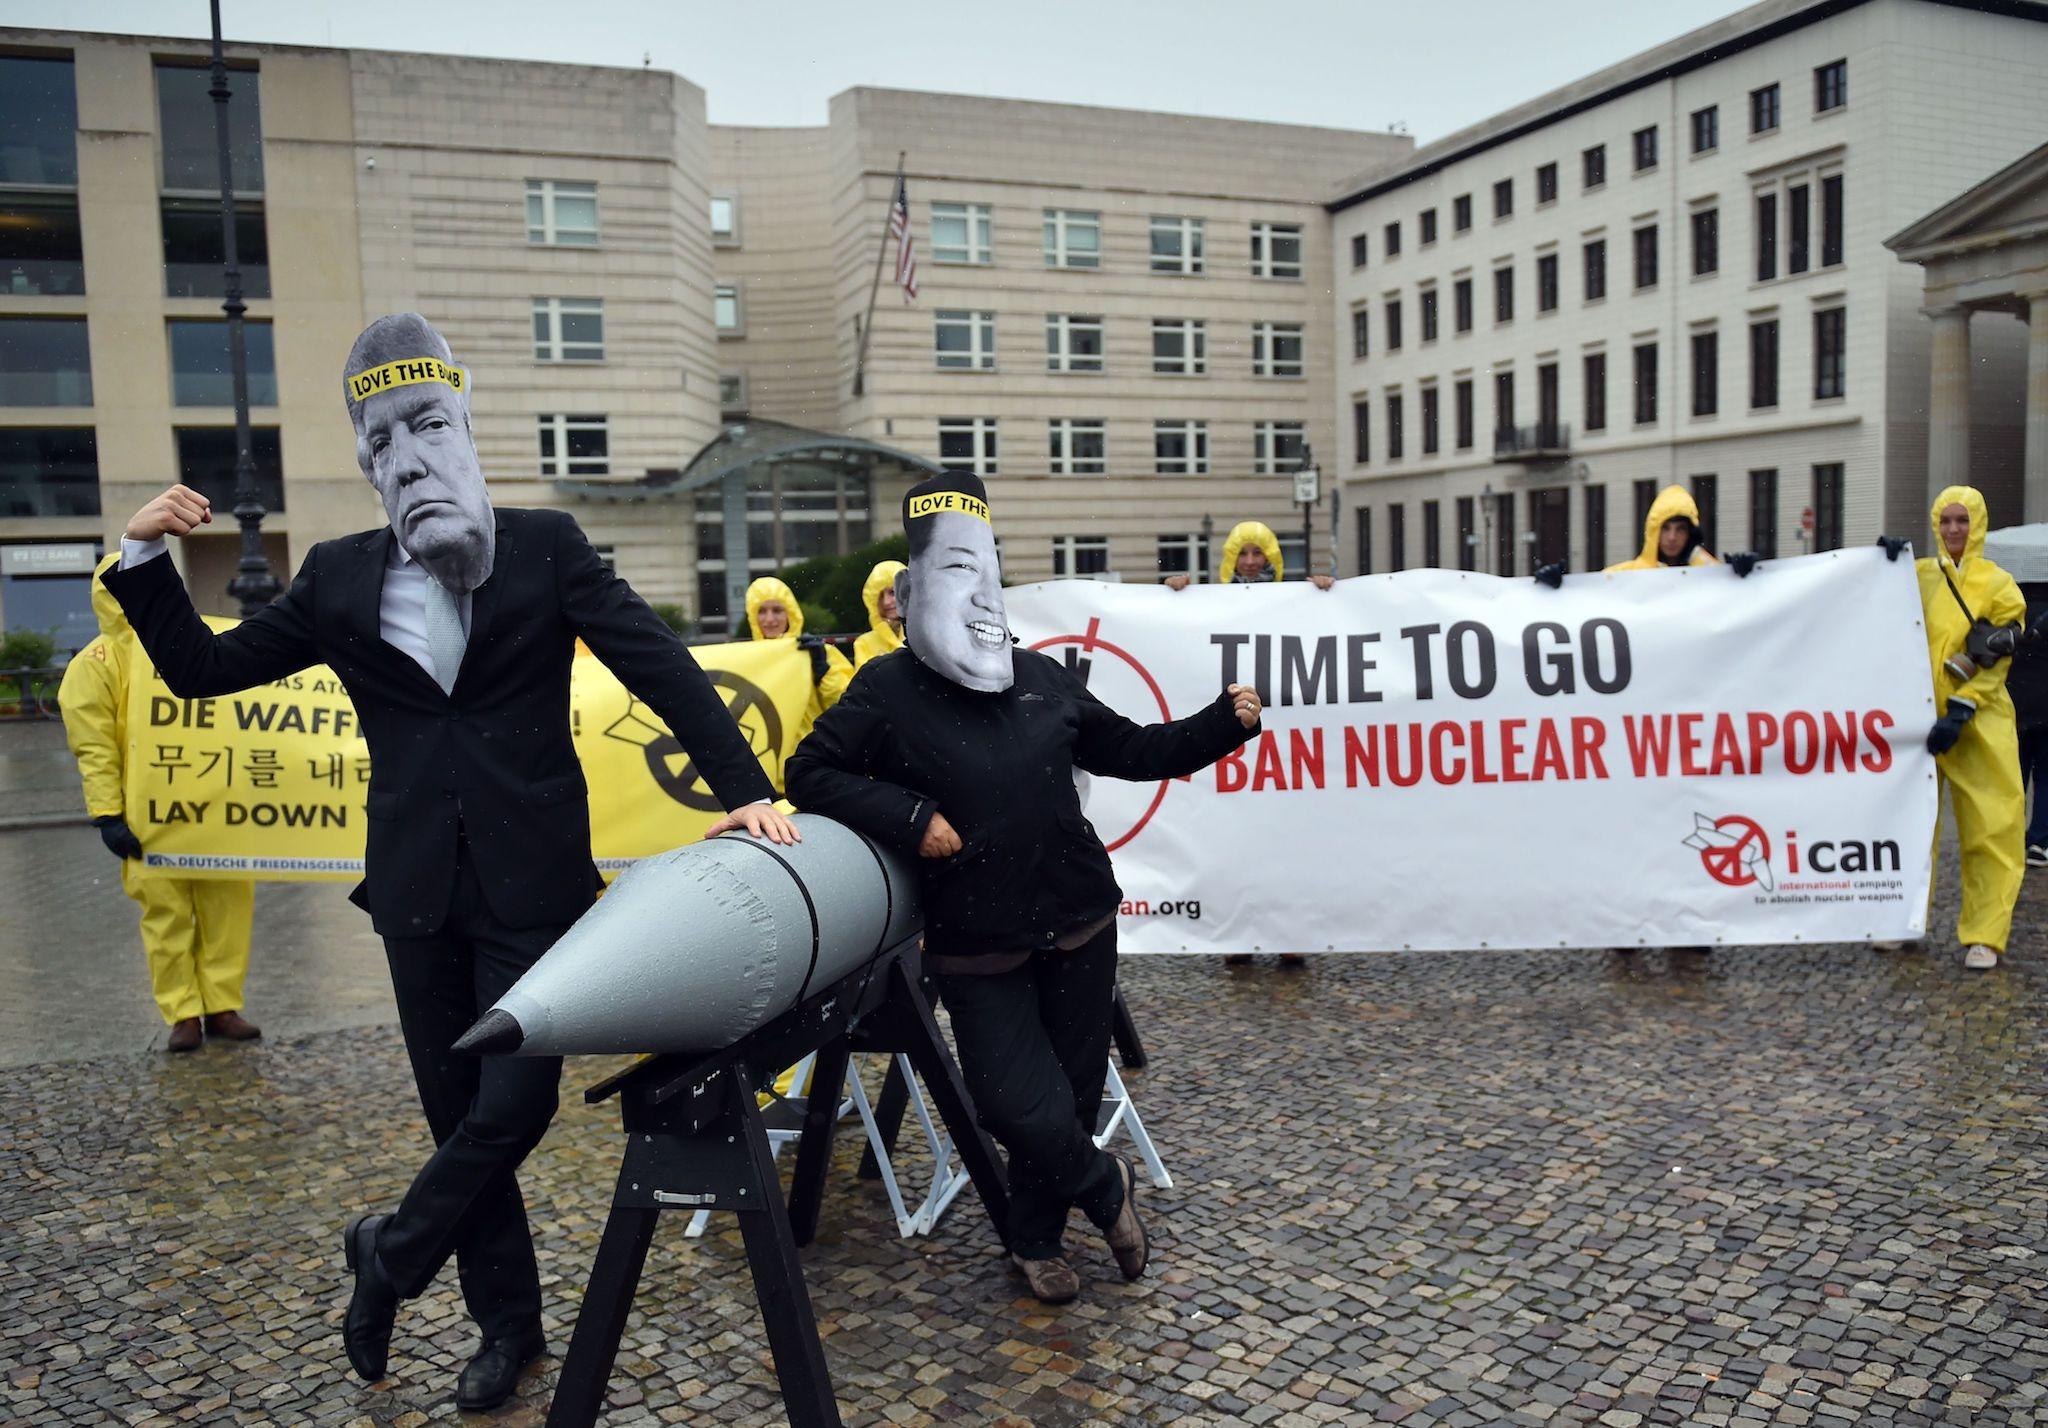 Picture taken on September 13, 2017 shows activists of the International campaign to abolish Nuclear Weapons (ICAN) wearing masks of US President Donald Trump and North Korea's leader Kim Jong-un as they demonstrate in front of the US embassy in Berlin